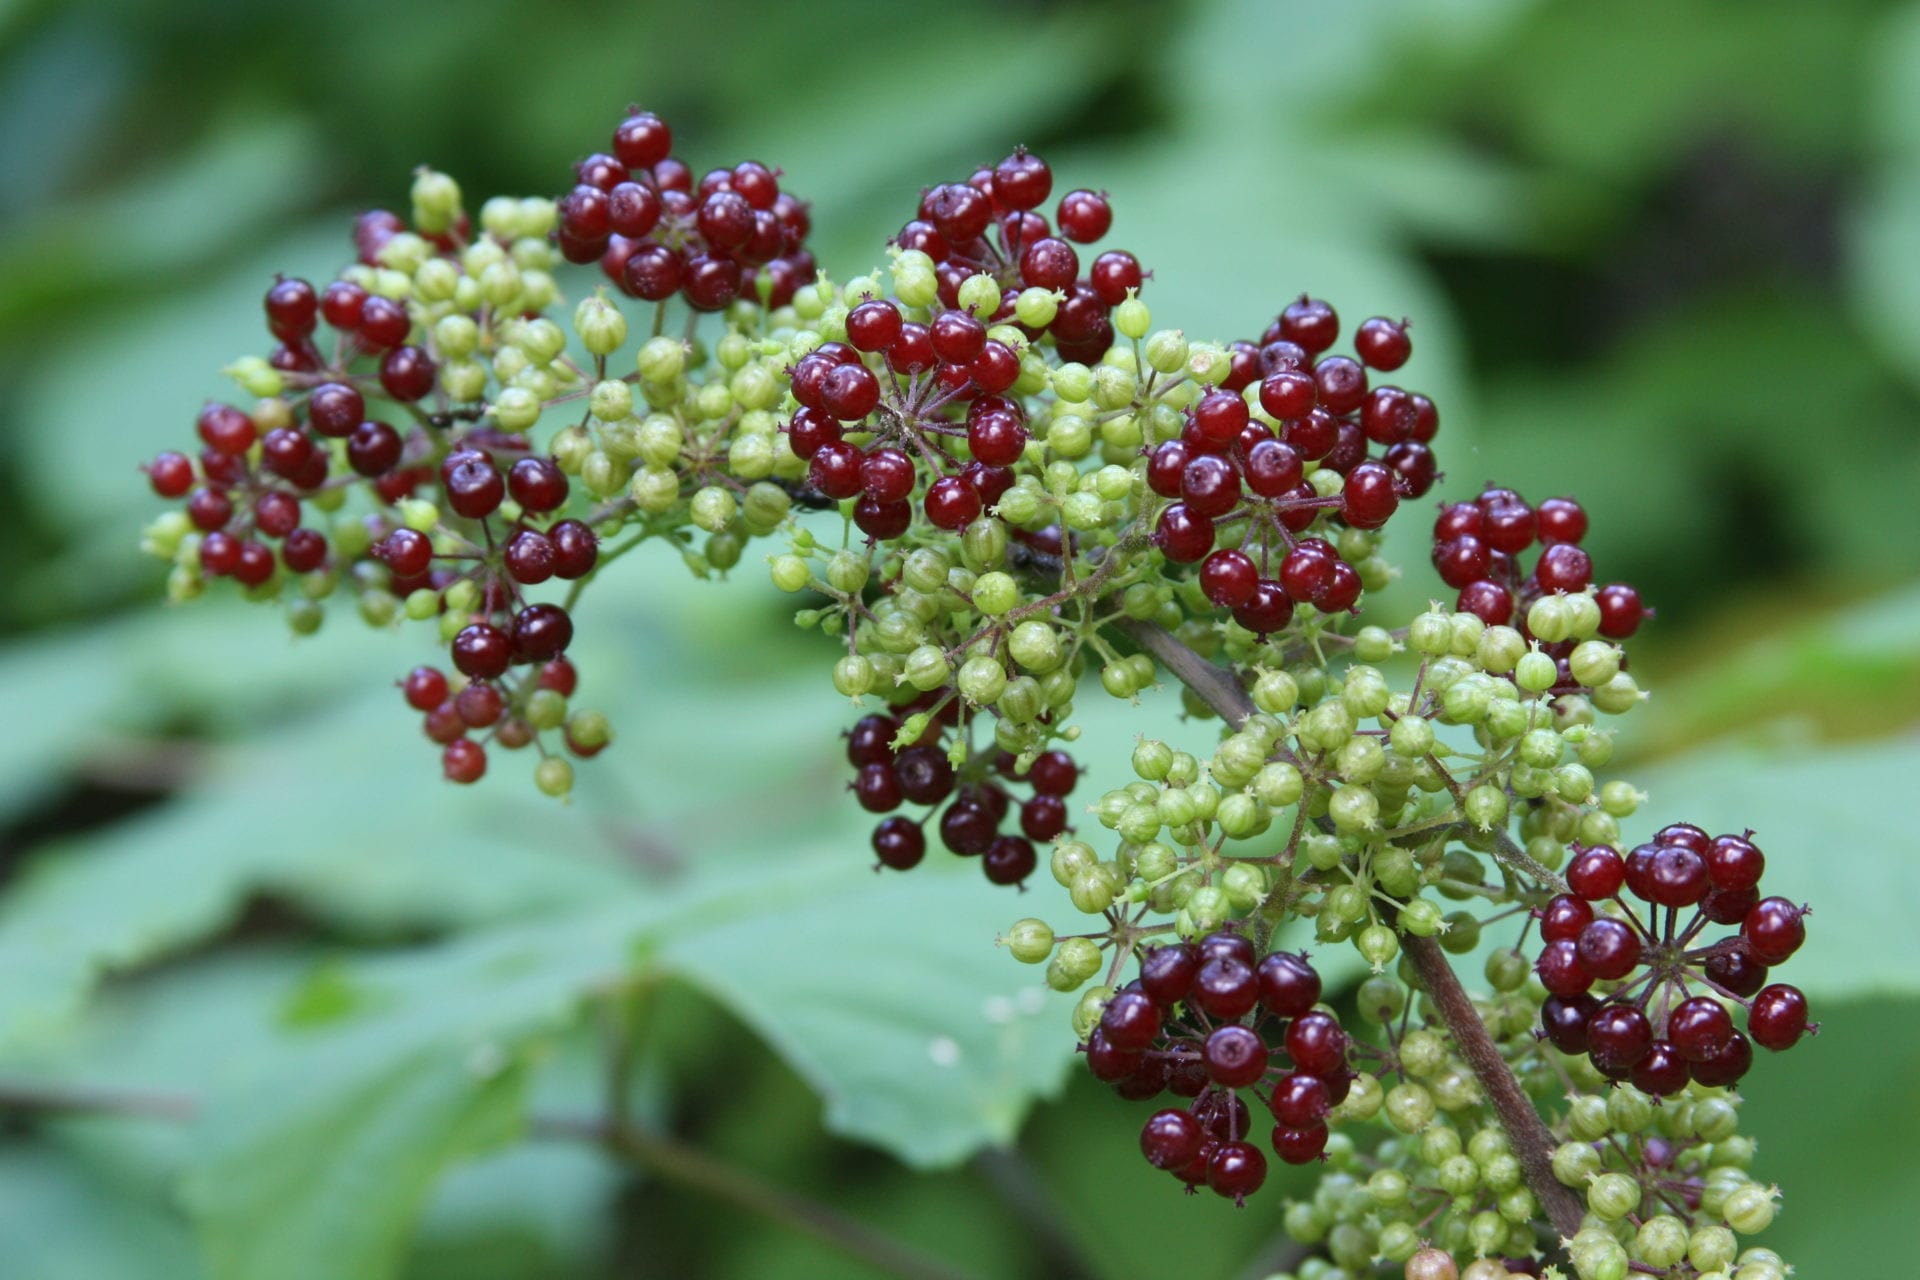 aralia spikenard native racemose racemosa permaculture go plants reminiscent berry flavor tasty produces purple season summer american red